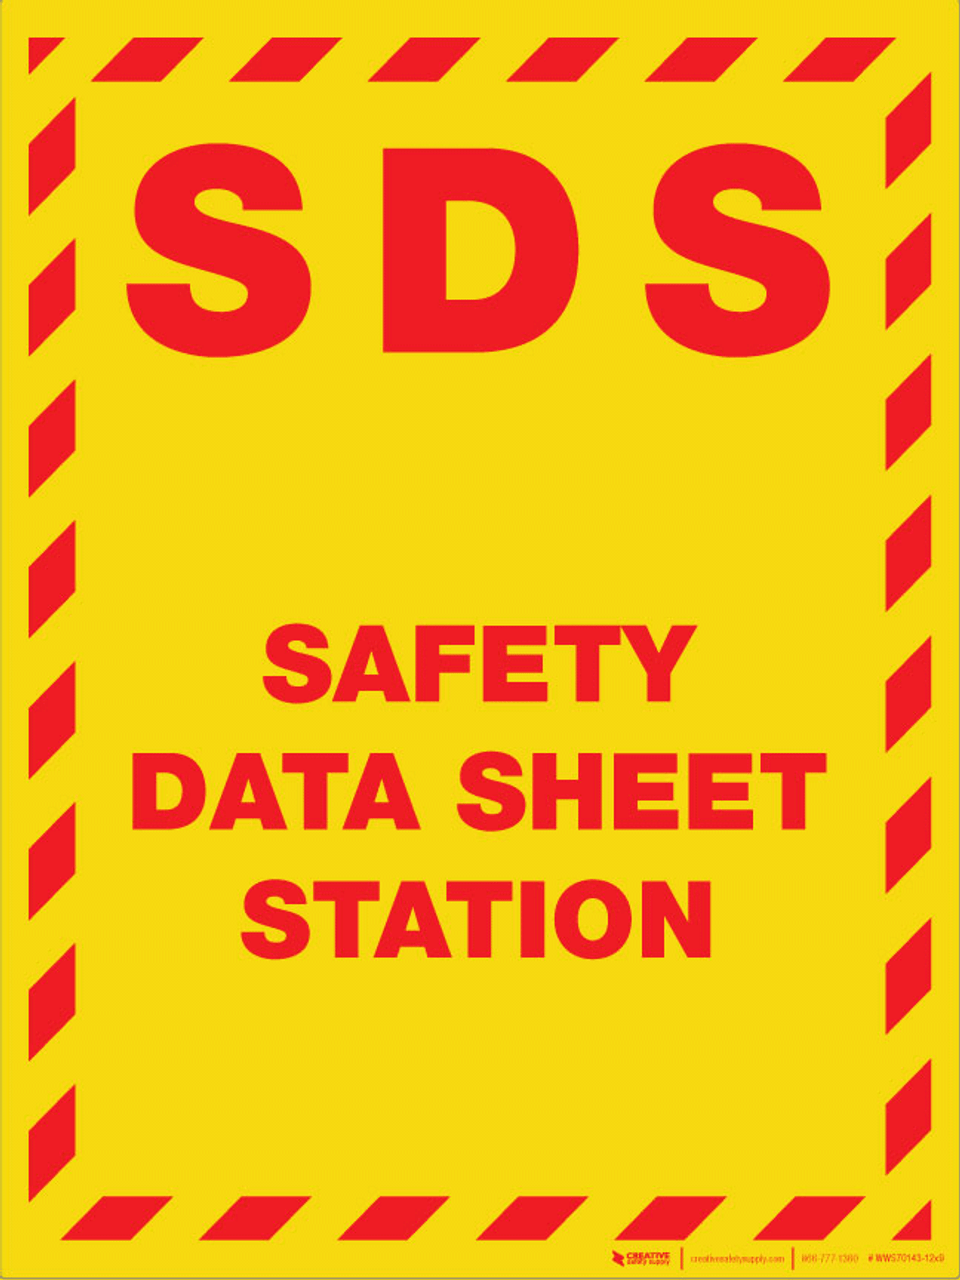 Sds Safety Data Sheet Station Wall Sign Creative Safety Supply